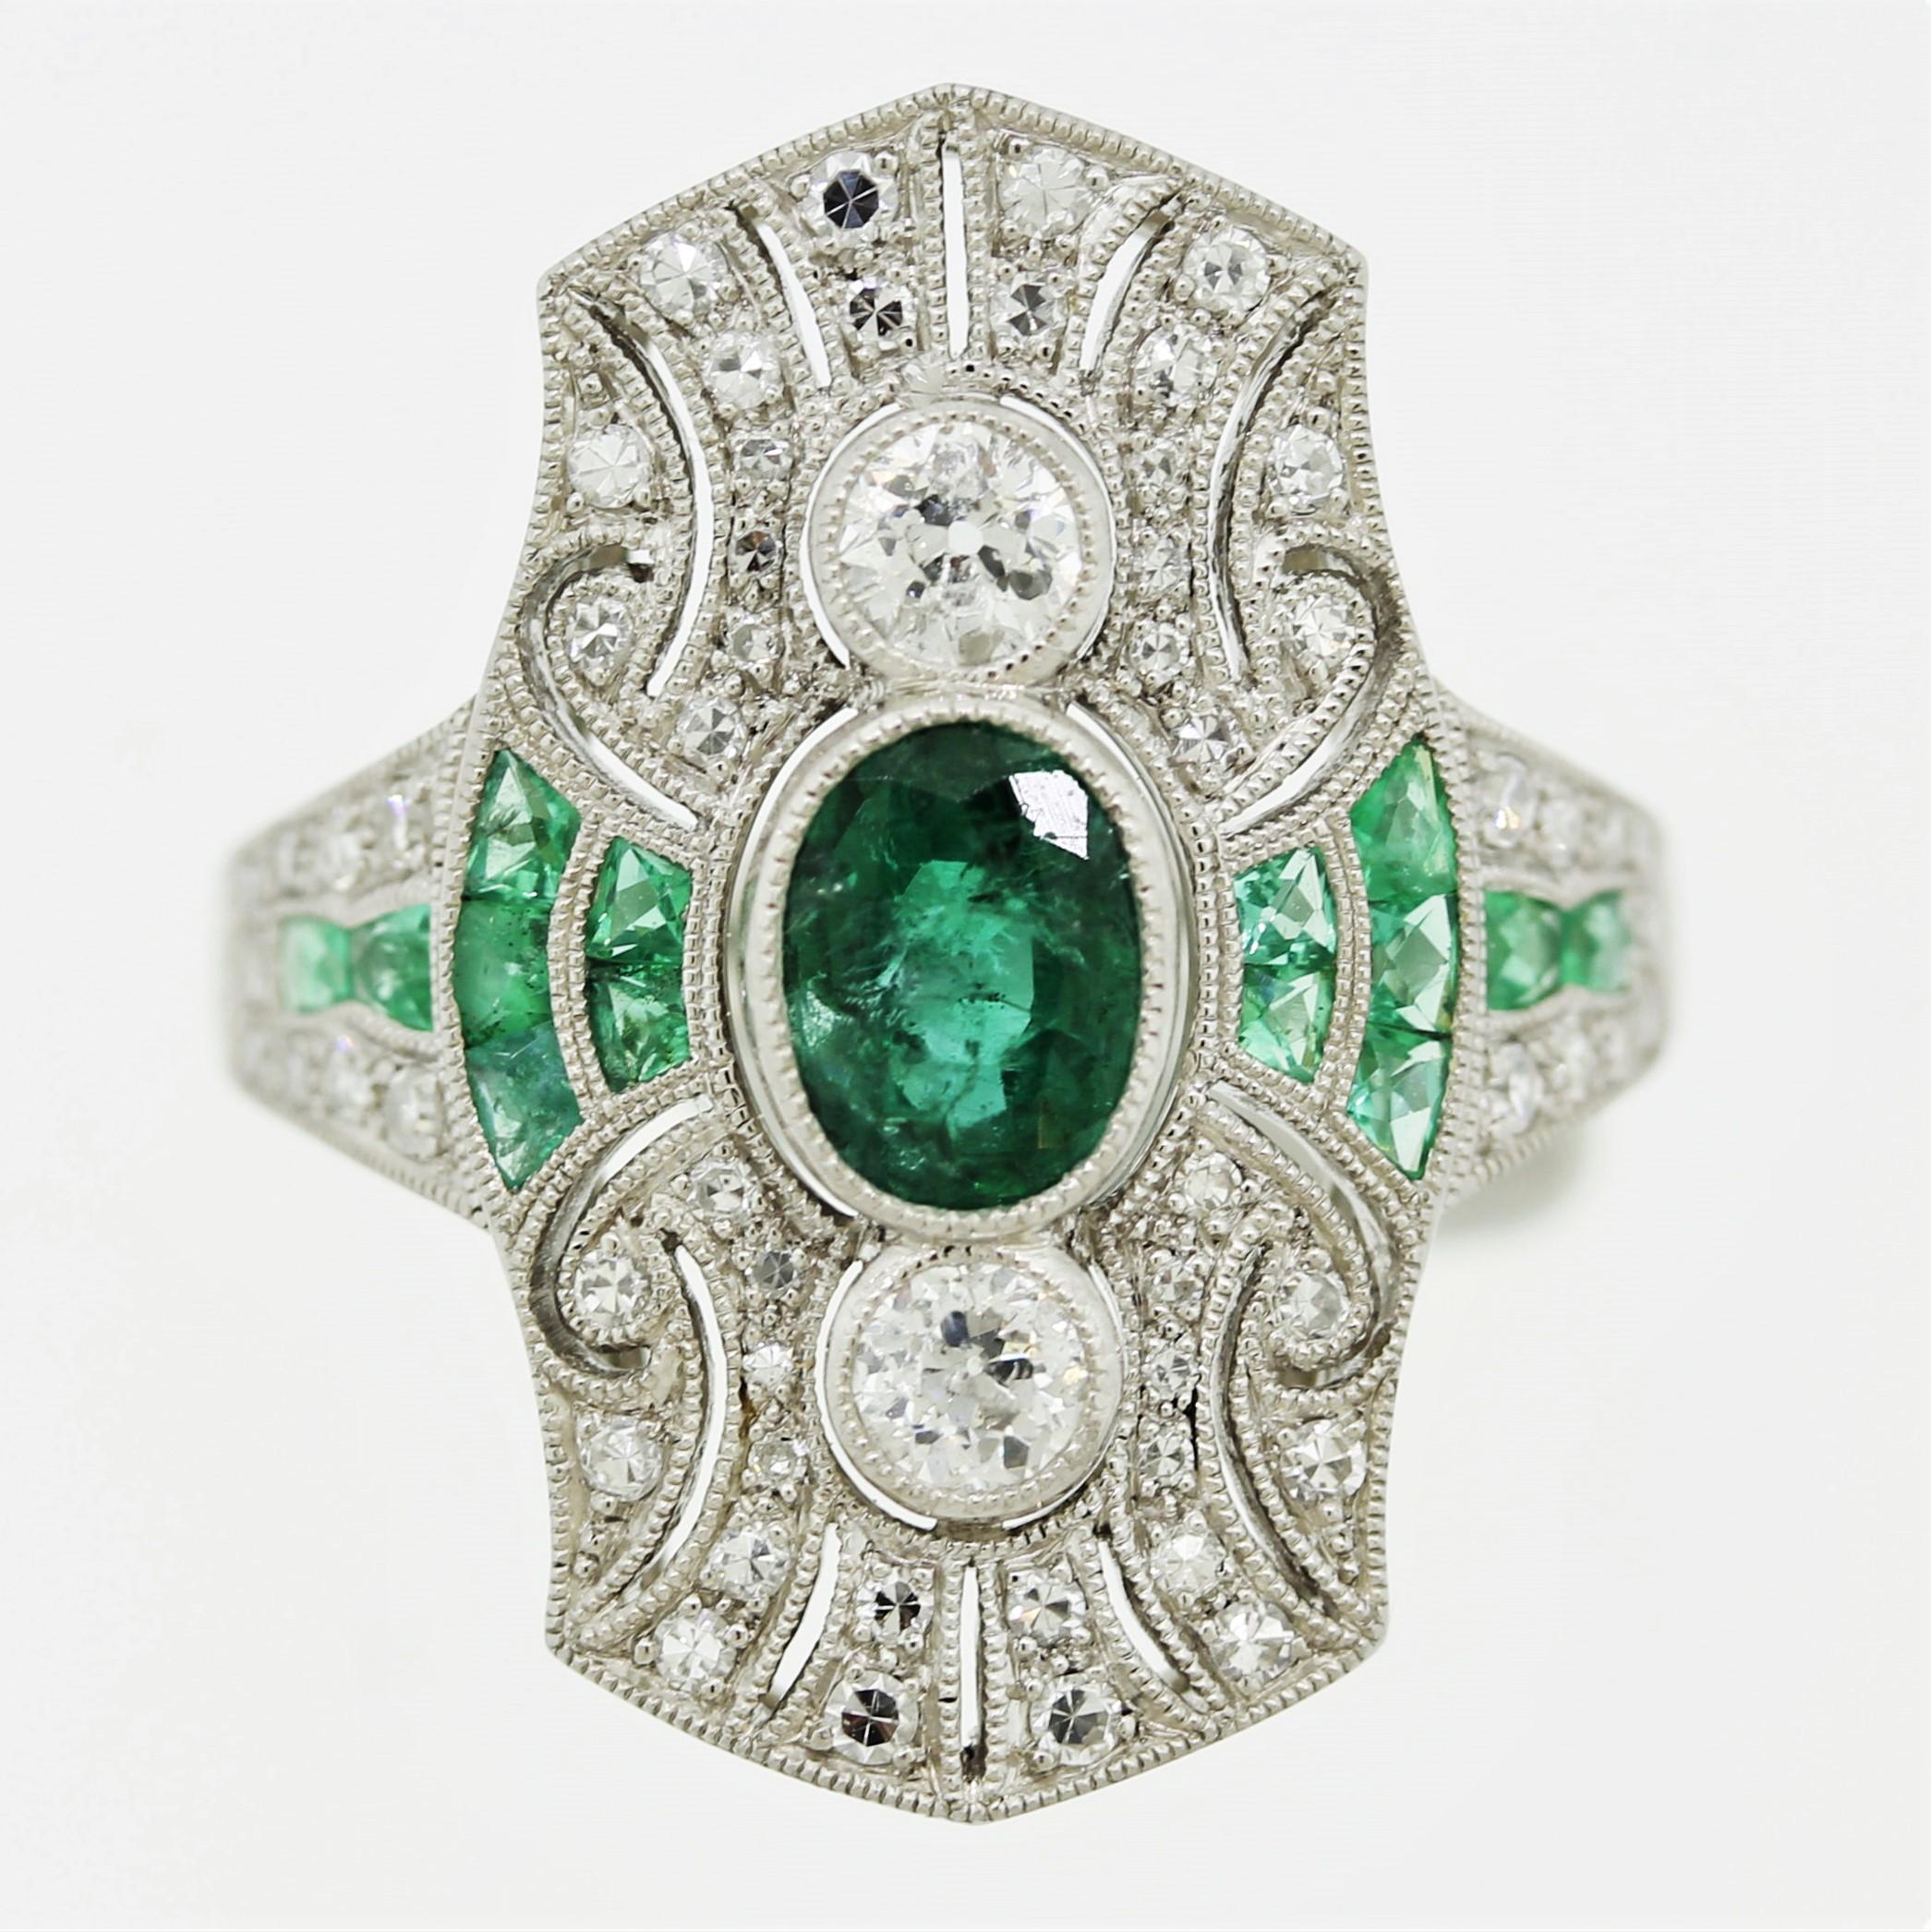 A new ring designed and crafted in original Art Deco style from the 1920’s. It features a large oval-shape emerald in its center which is accented by smaller french-cut emeralds set in its sides. Addings brilliance and sparkle are european-cut